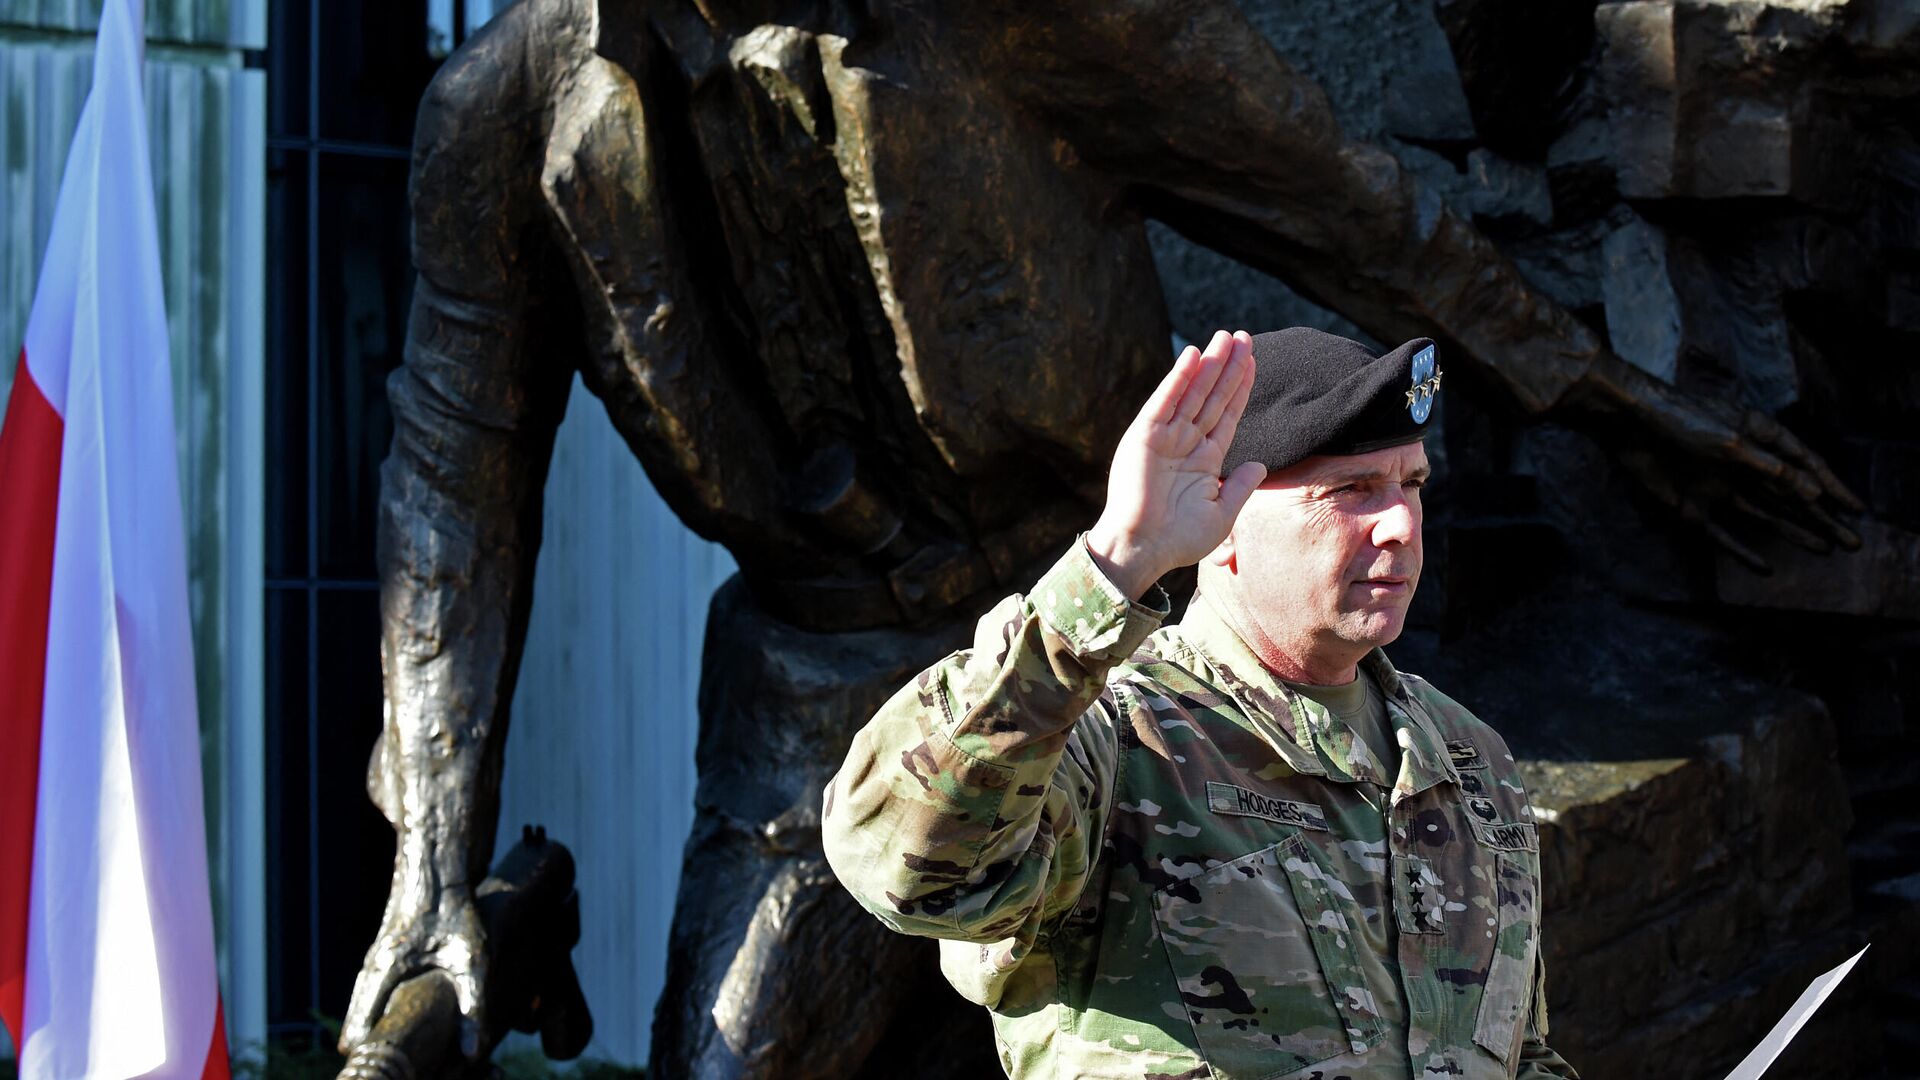 Lieutenant General Ben Hodges, the US Army commander in Europe,  promotes Lieutenant Kirk Brandenburg (unseen) to captain on August 14, 2017 in the Polish capital Warsaw on the eve of Armed Forces Day in NATO member Poland. - The US Army Europe opened new headquarters in Poland in May to command troops deployed in NATO and Pentagon operations across the alliance's eastern flank aimed at deterring Russia.  - Sputnik International, 1920, 18.01.2022